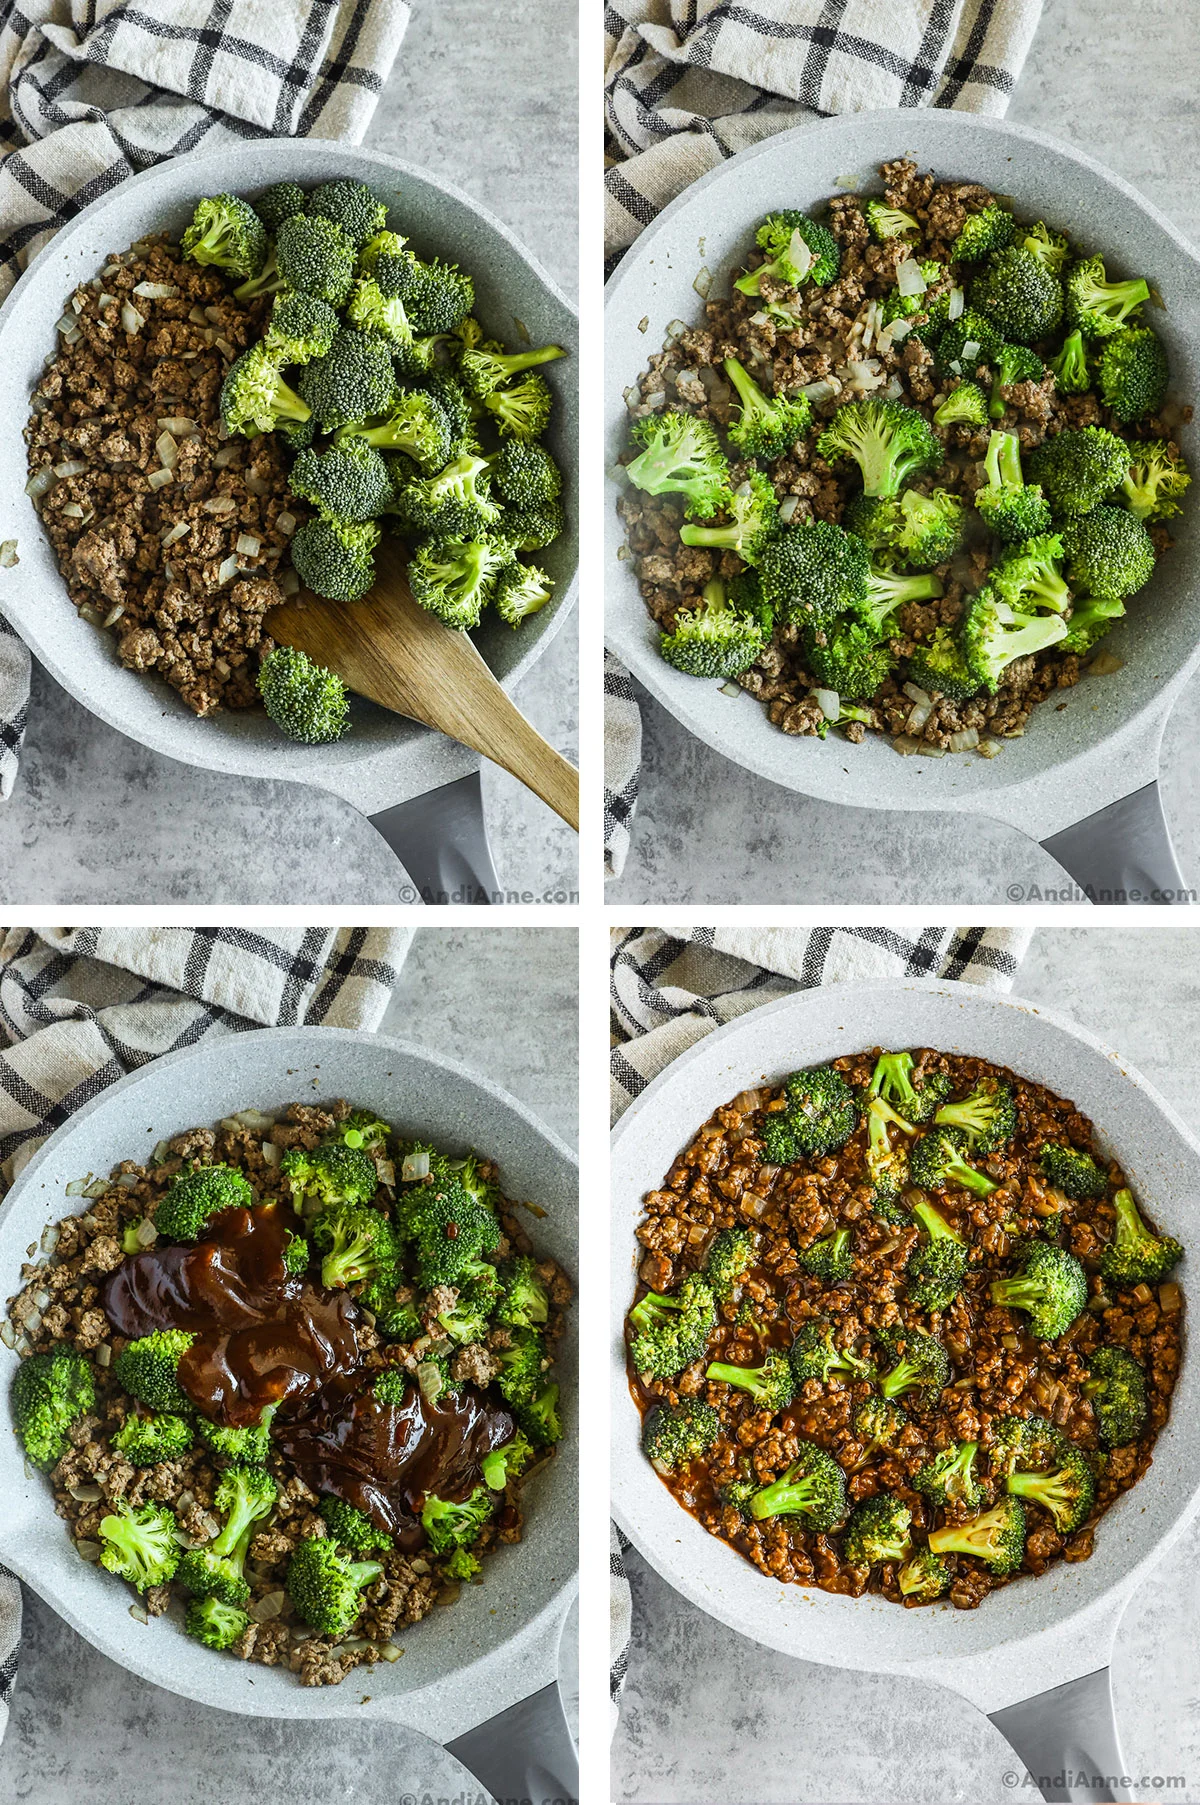 Four images of frying pan. First is ground beef and raw broccoli florets. Second is ground beef and broccoli florets mixed together in pan. Third has sauce dumped on top of broccoli ground beef. Last image is final ground beef broccoli mixture in honey garlic sauce.